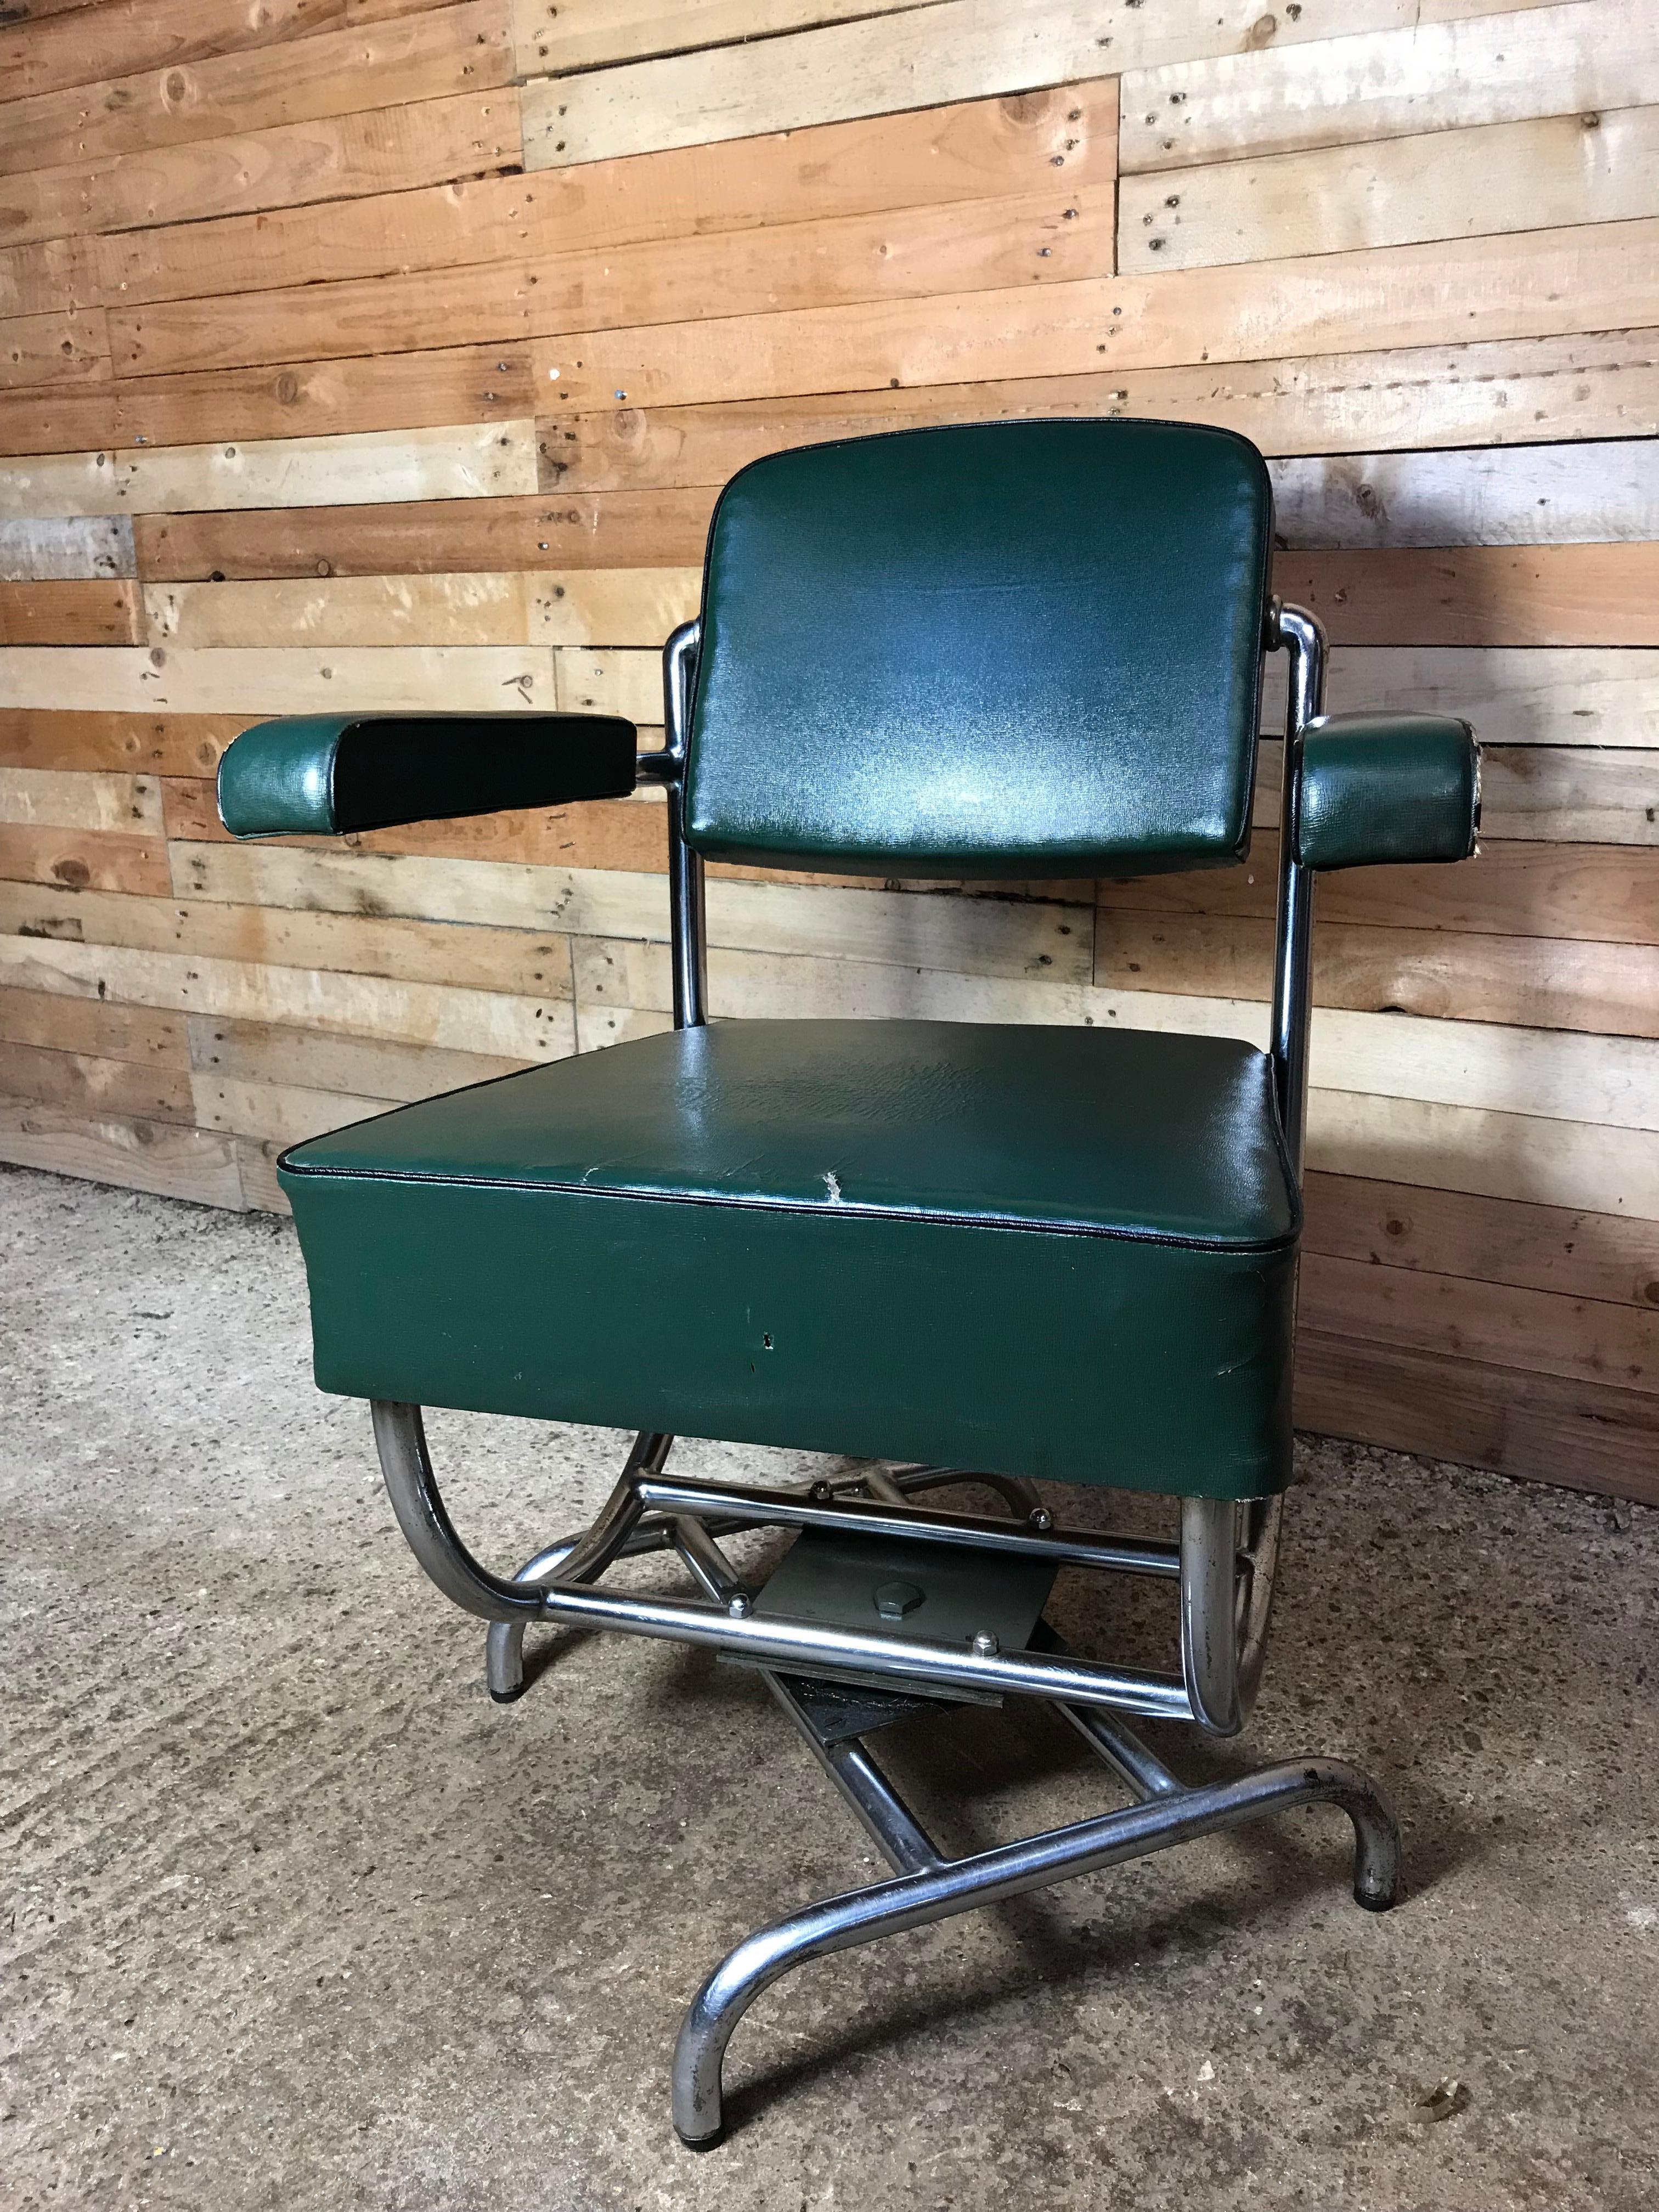 Art Deco Gispen sought after swivel armchair or office chair by W.H. Gispen, 1930.

This chair is increadably rare we have not been able to locate another one like this!

100% original armchair is in very good condition with only a couple of